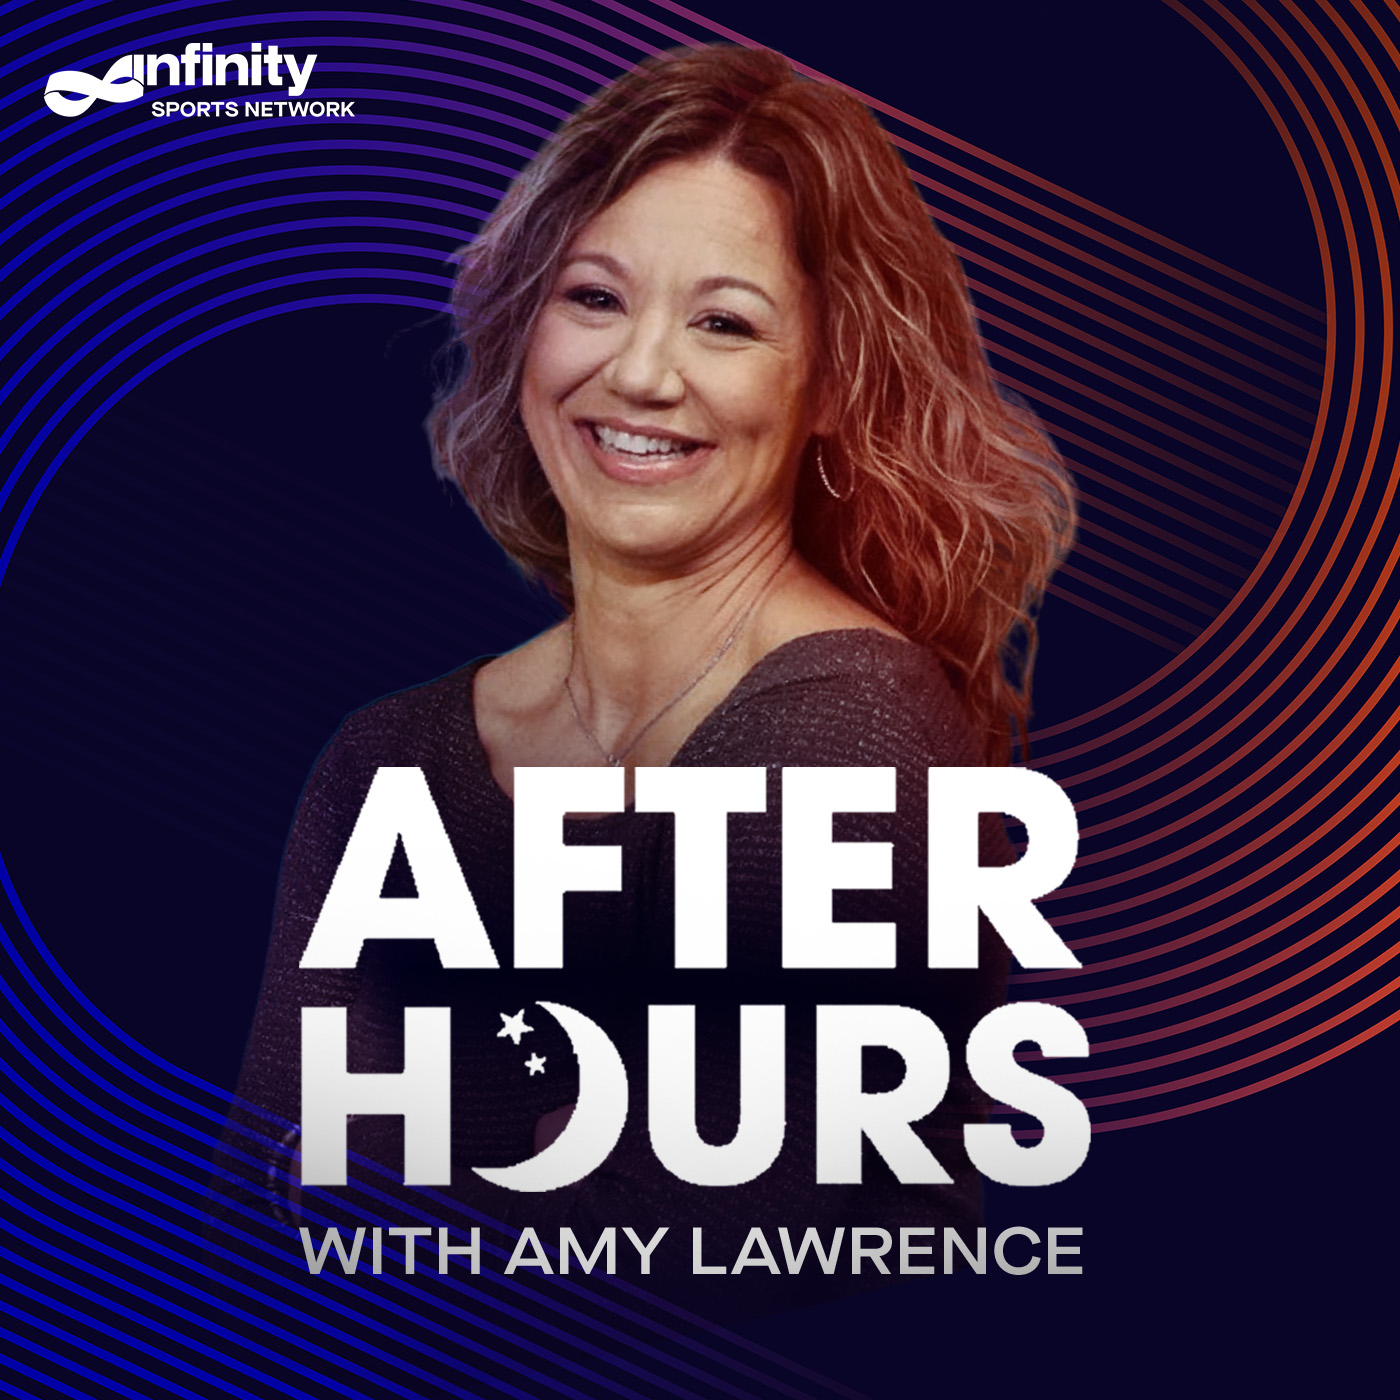 6/2/21 After Hours with Amy Lawrence PODCAST: Hour 1